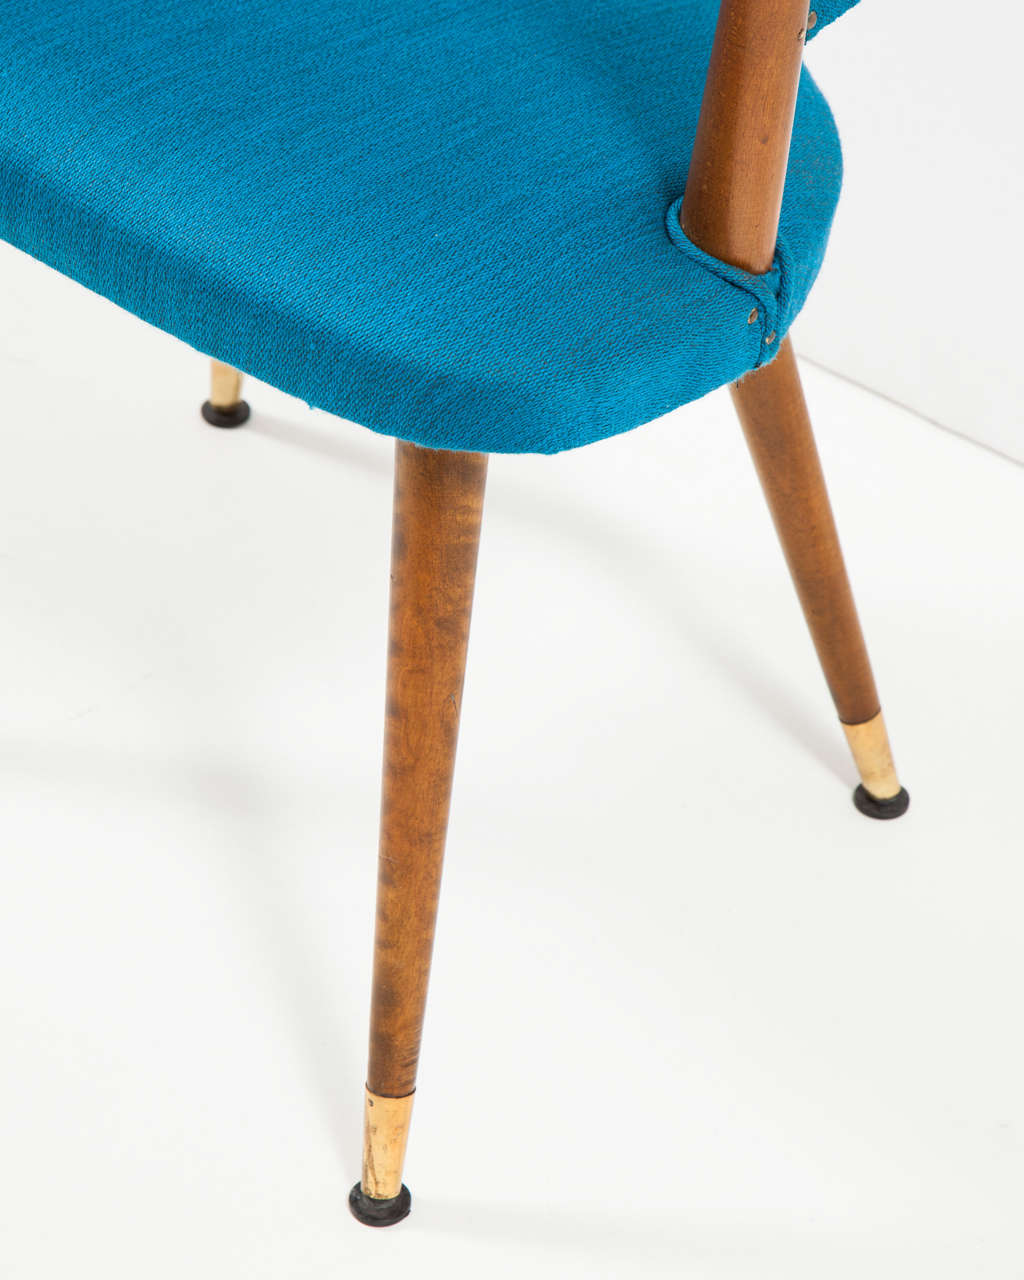 Mid-20th Century Small Desk Chair from Sweden